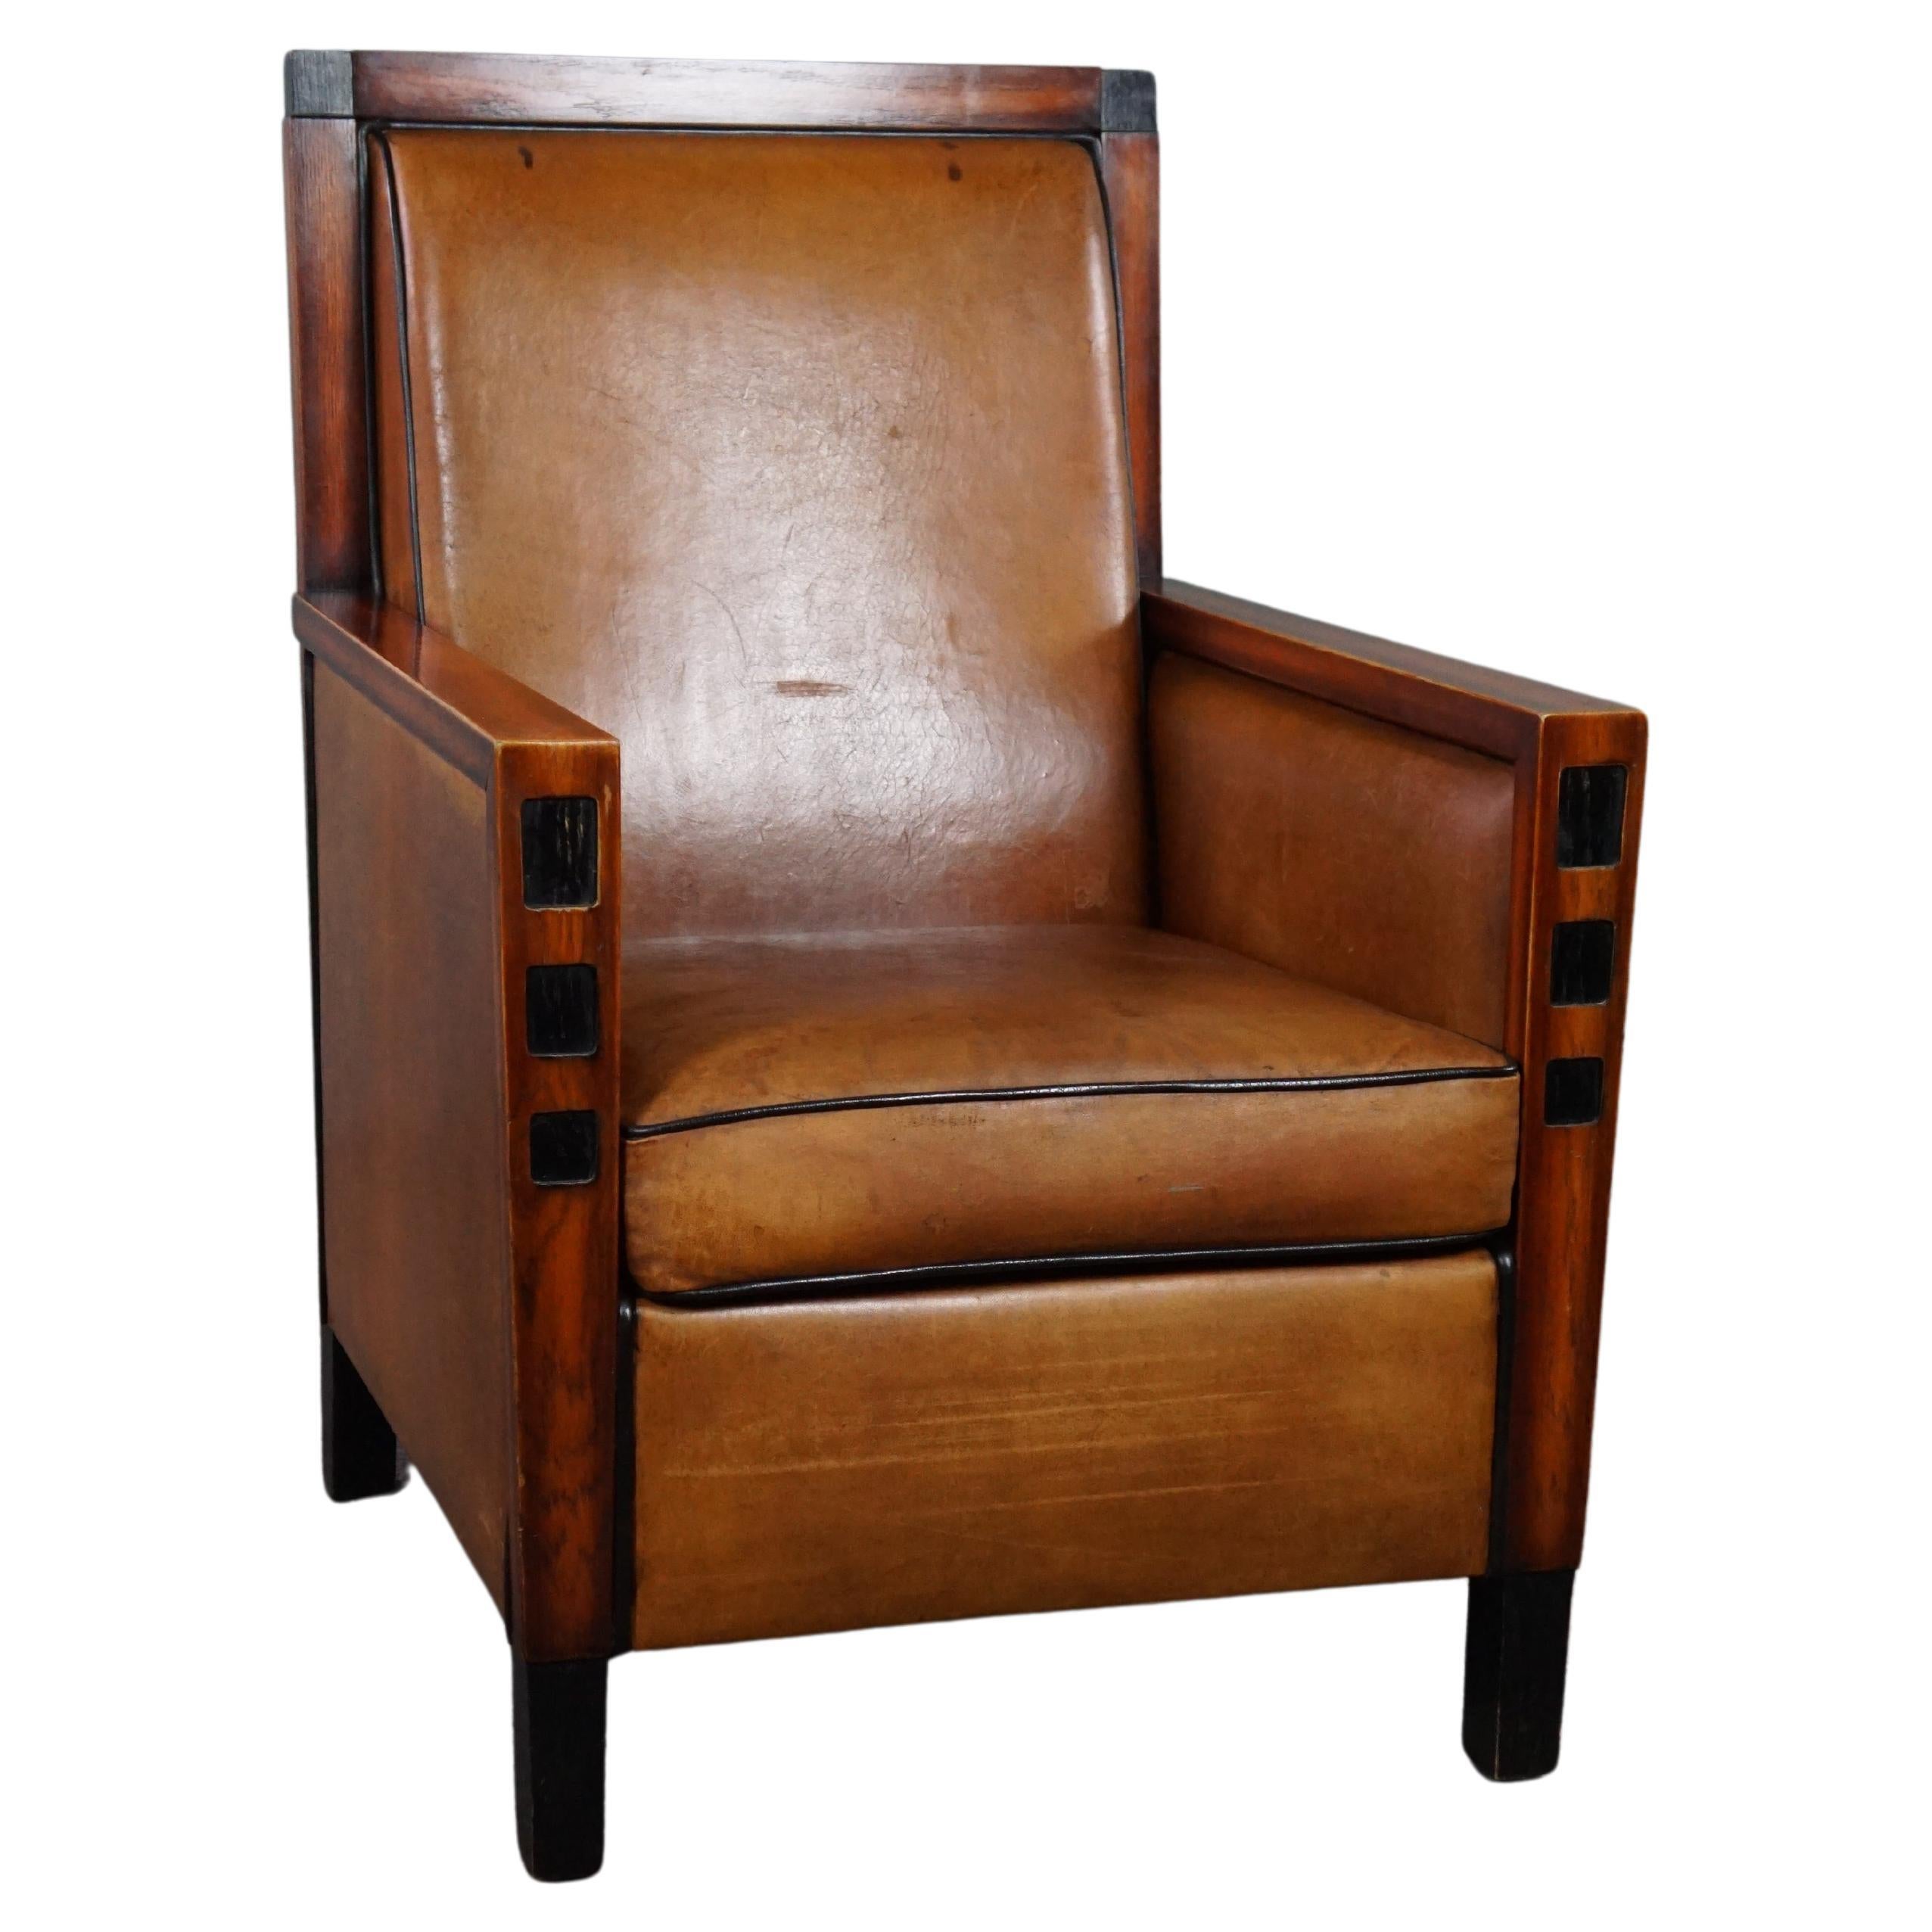 Insanely designed sheep leather Art Deco design armchair